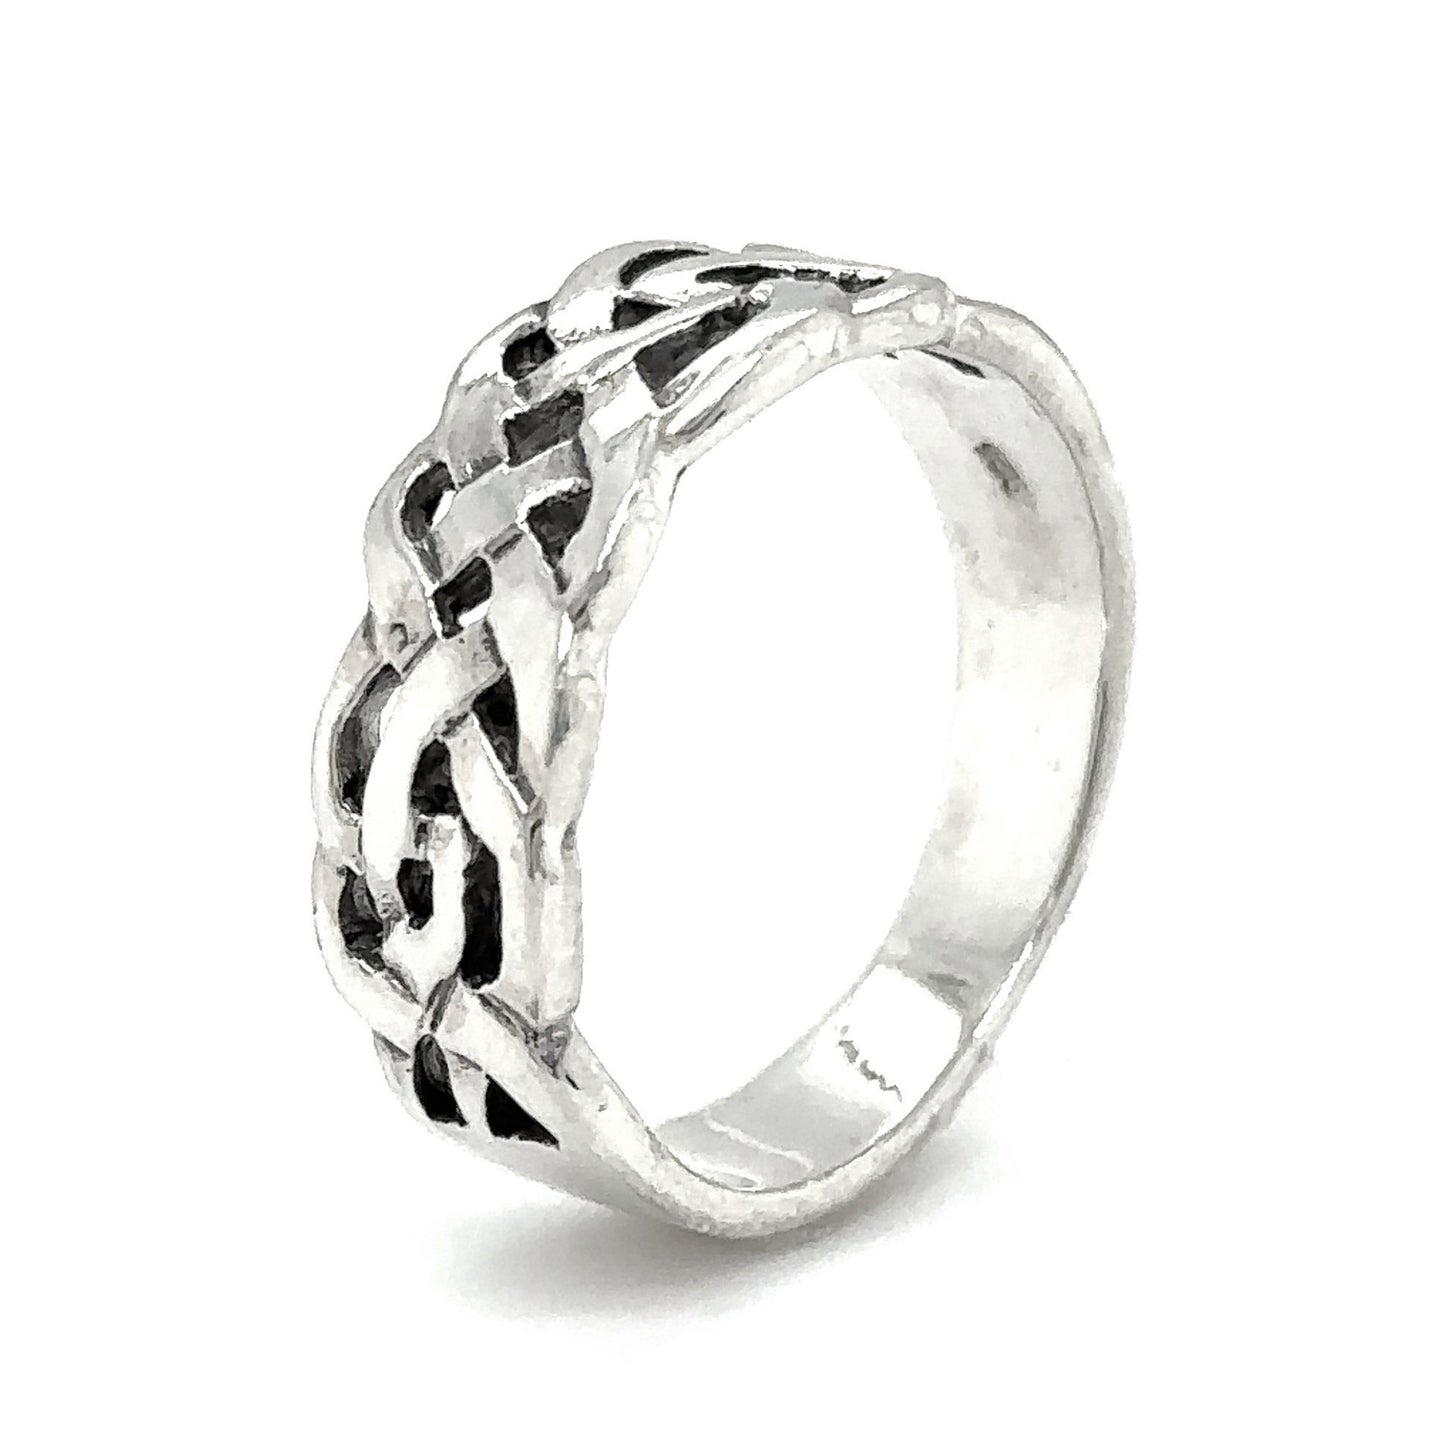 An elegant sterling silver Thick Celtic Weave Band, symbolizing strength with its knot design.